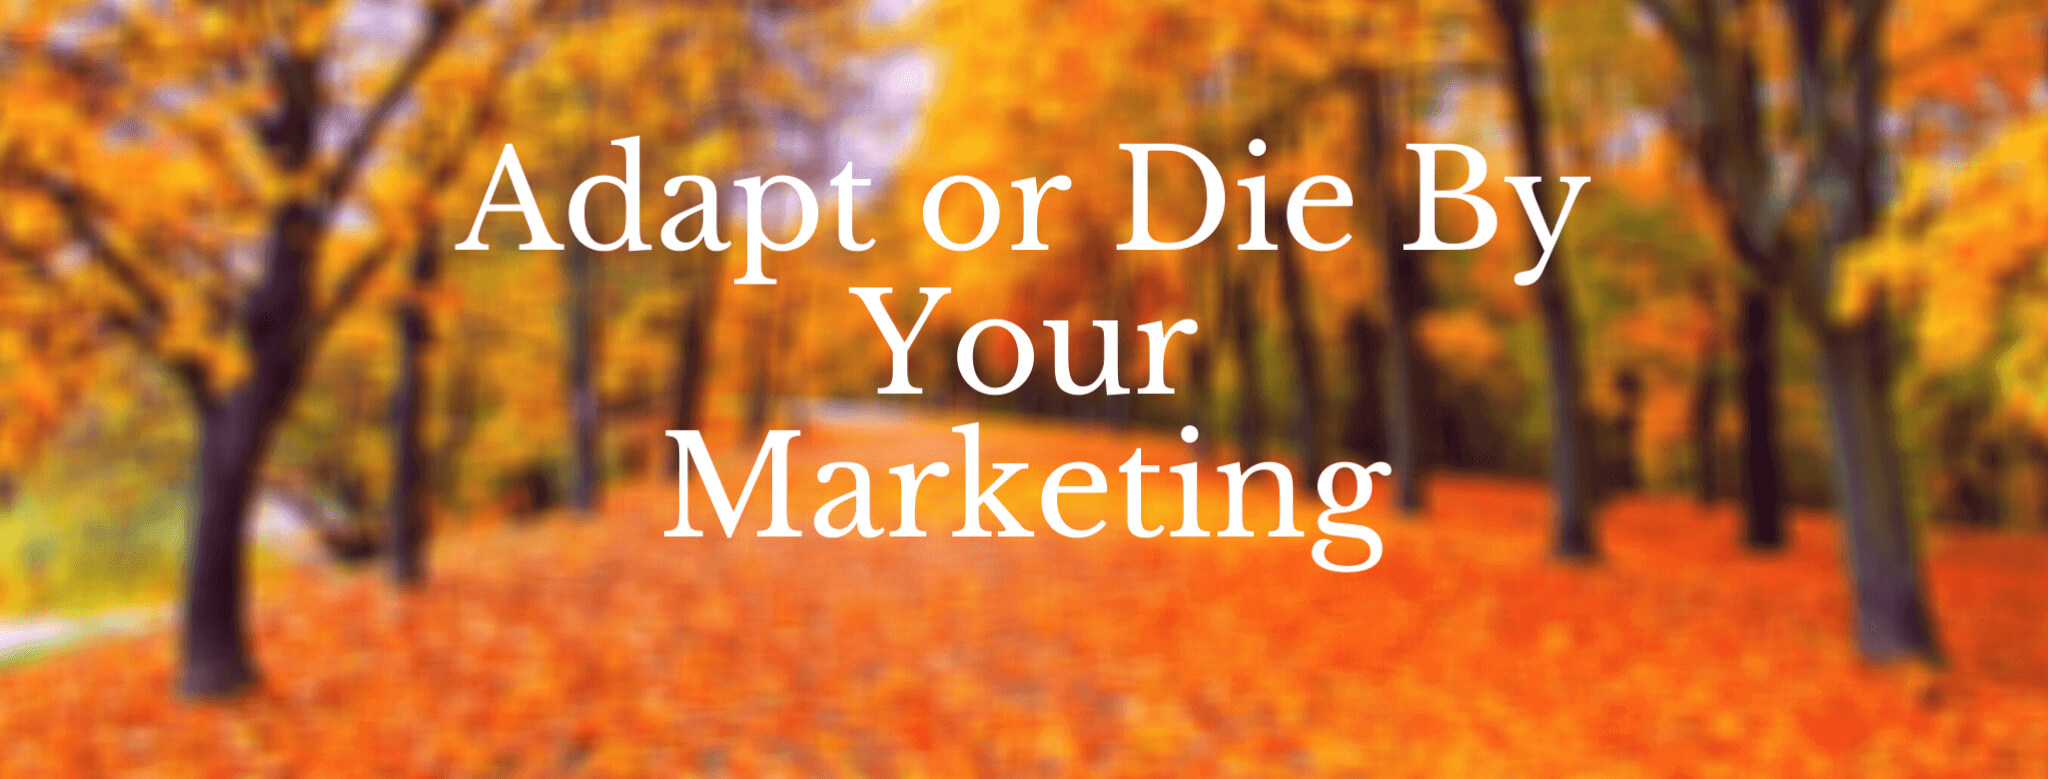 adapt or die by your marketing